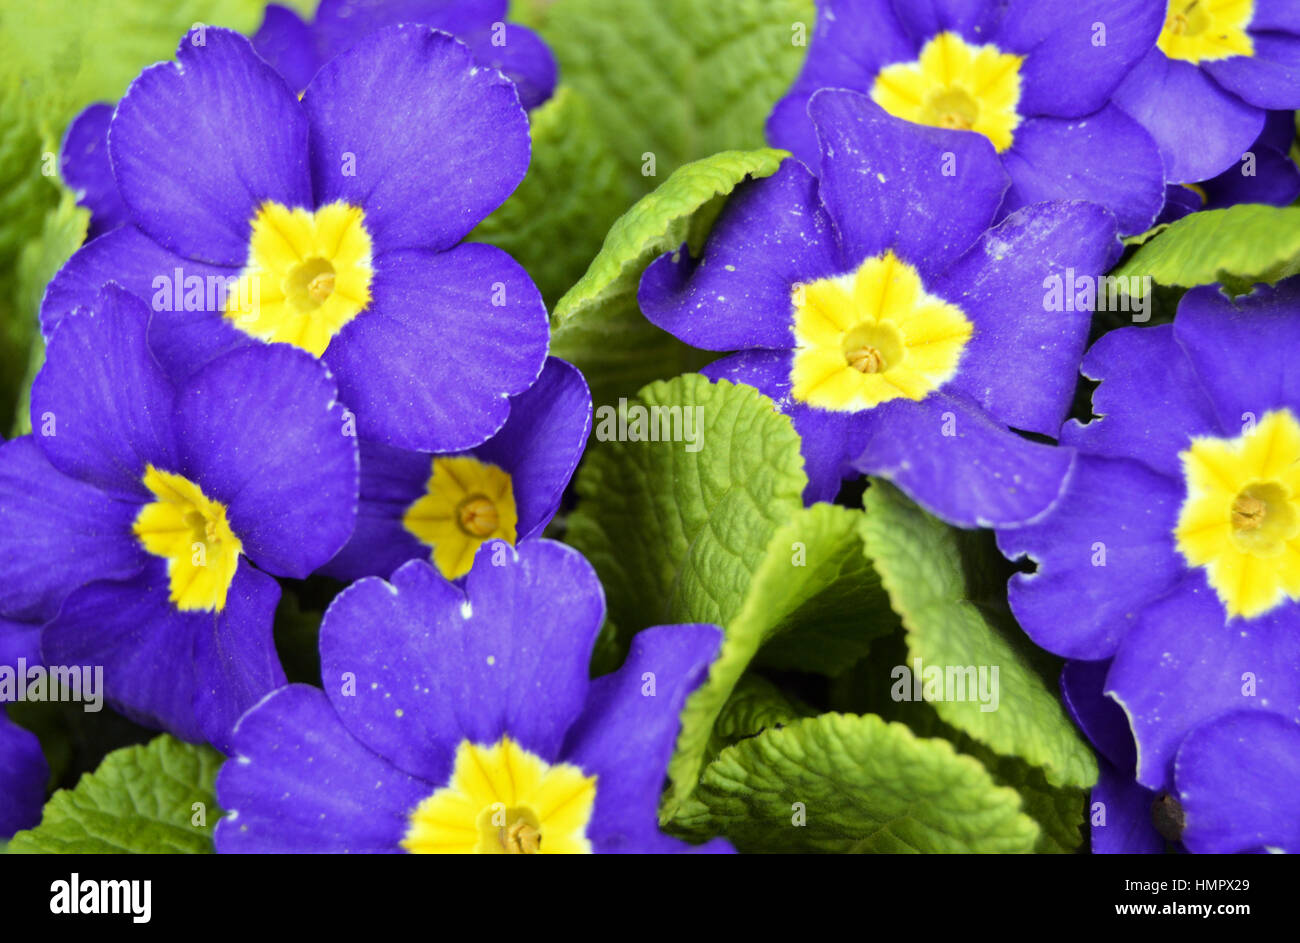 FW6WA4 Pink and yellow primroses with their green leaves for a background.. Image shot 2016. Exact date unknown. Stock Photo